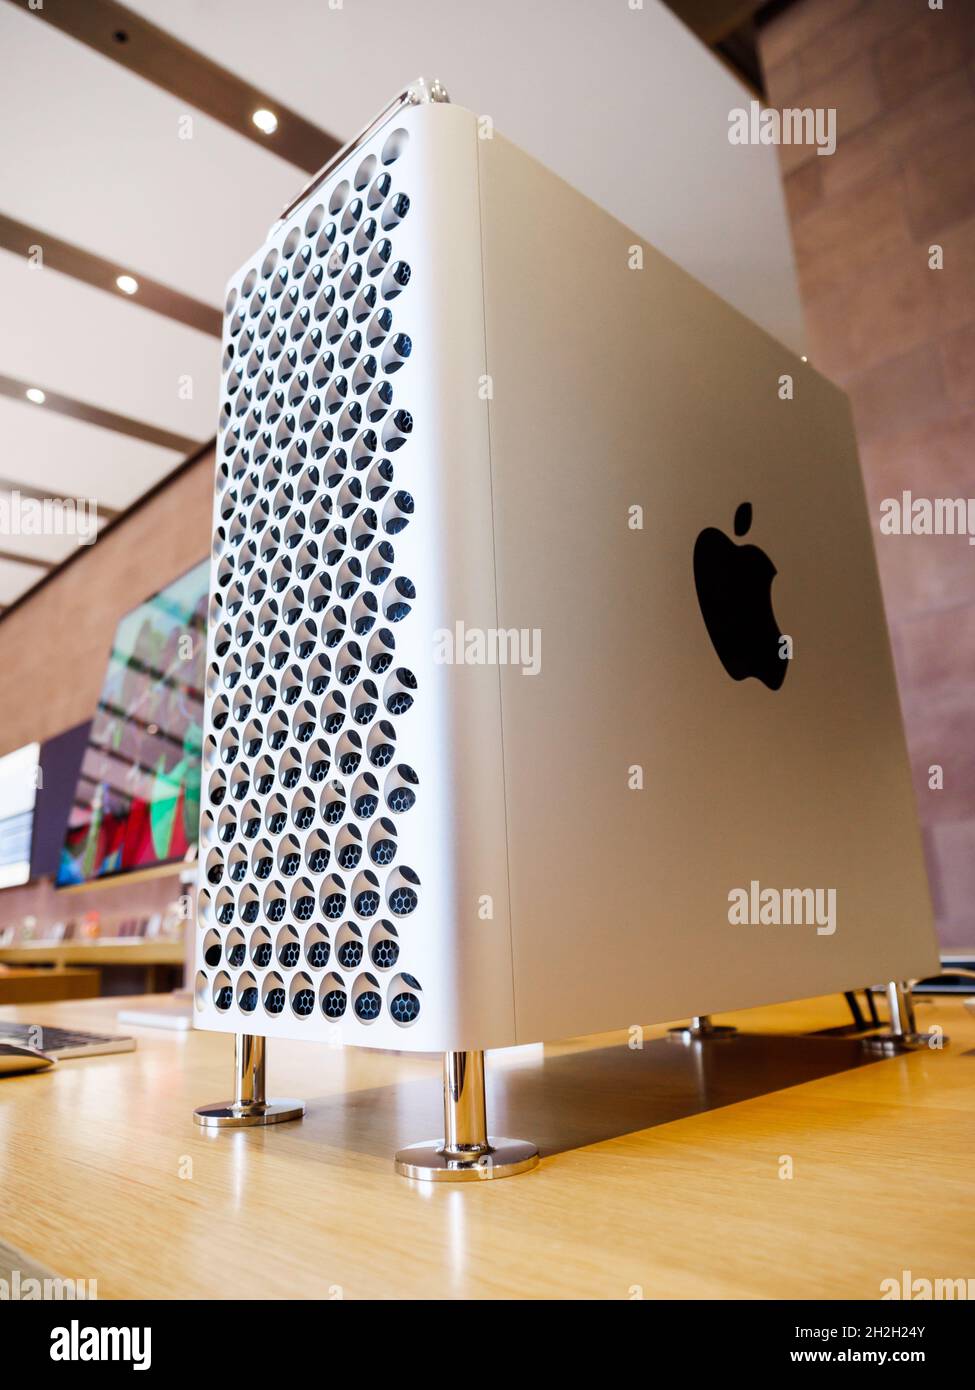 Apple Mac Pro workstation computer in Apple Store also known as the cheese- grater Stock Photo - Alamy